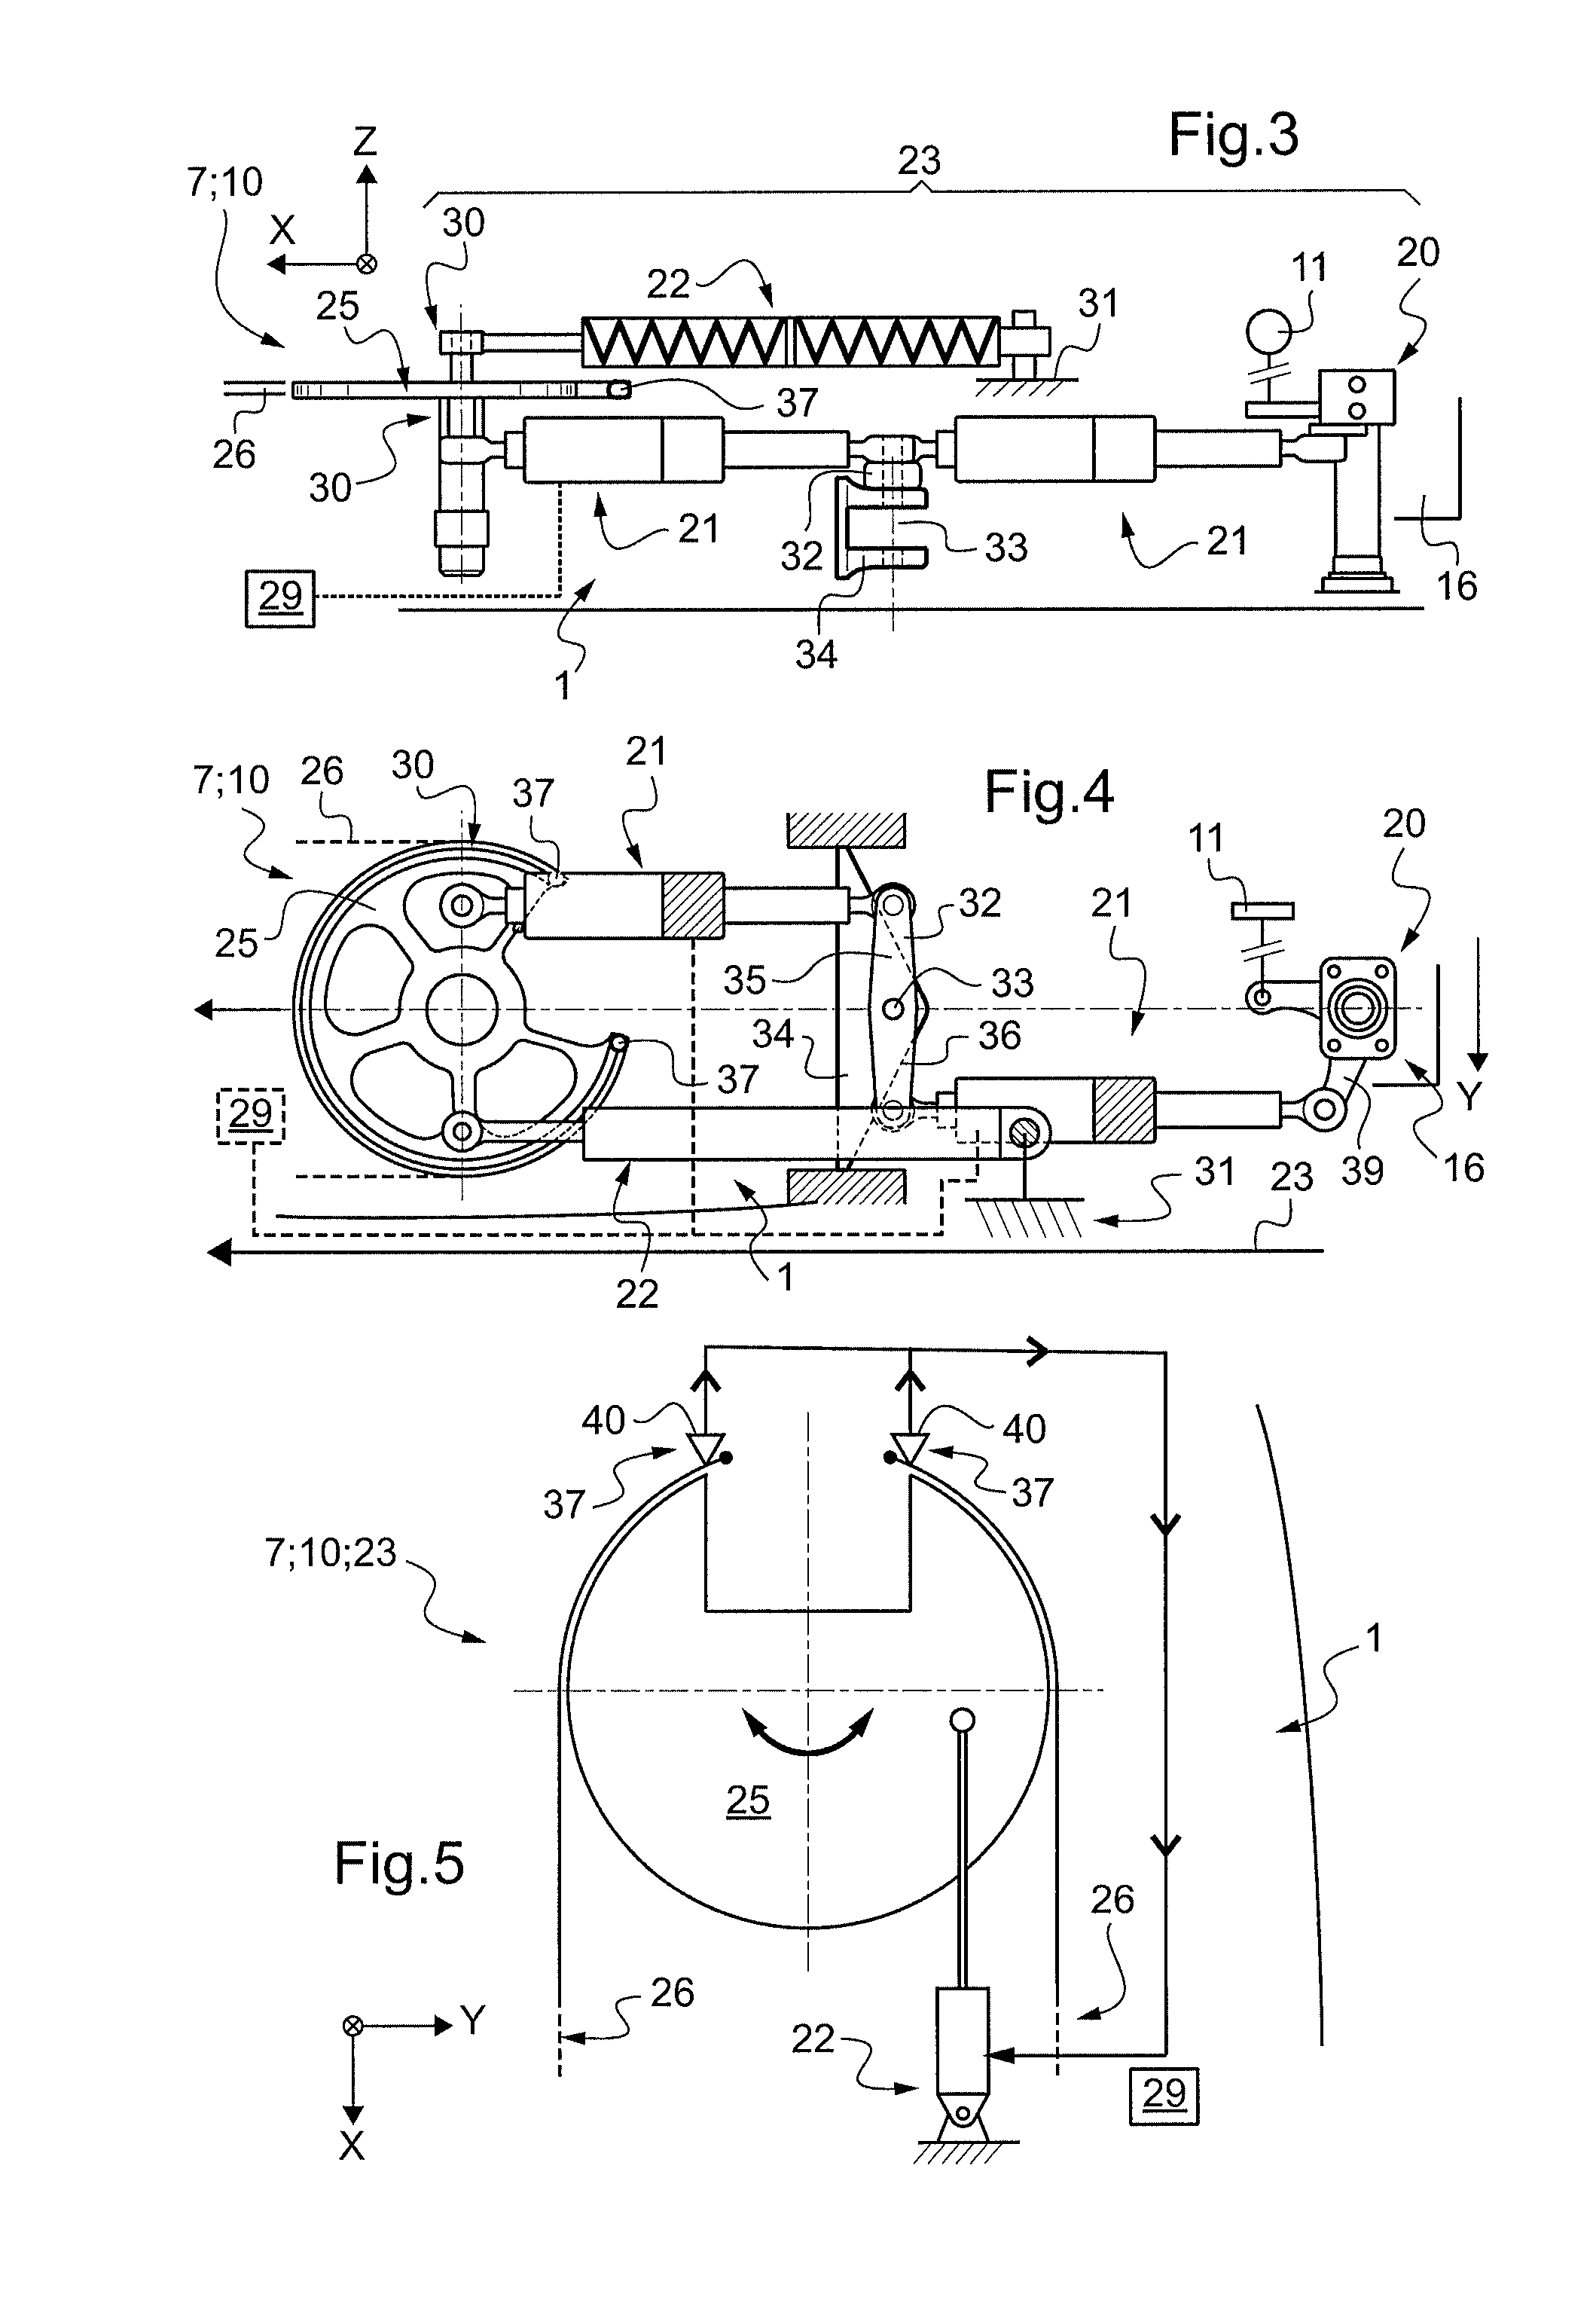 Emergency piloting by means of a series actuator for a manual flight control system in an aircraft